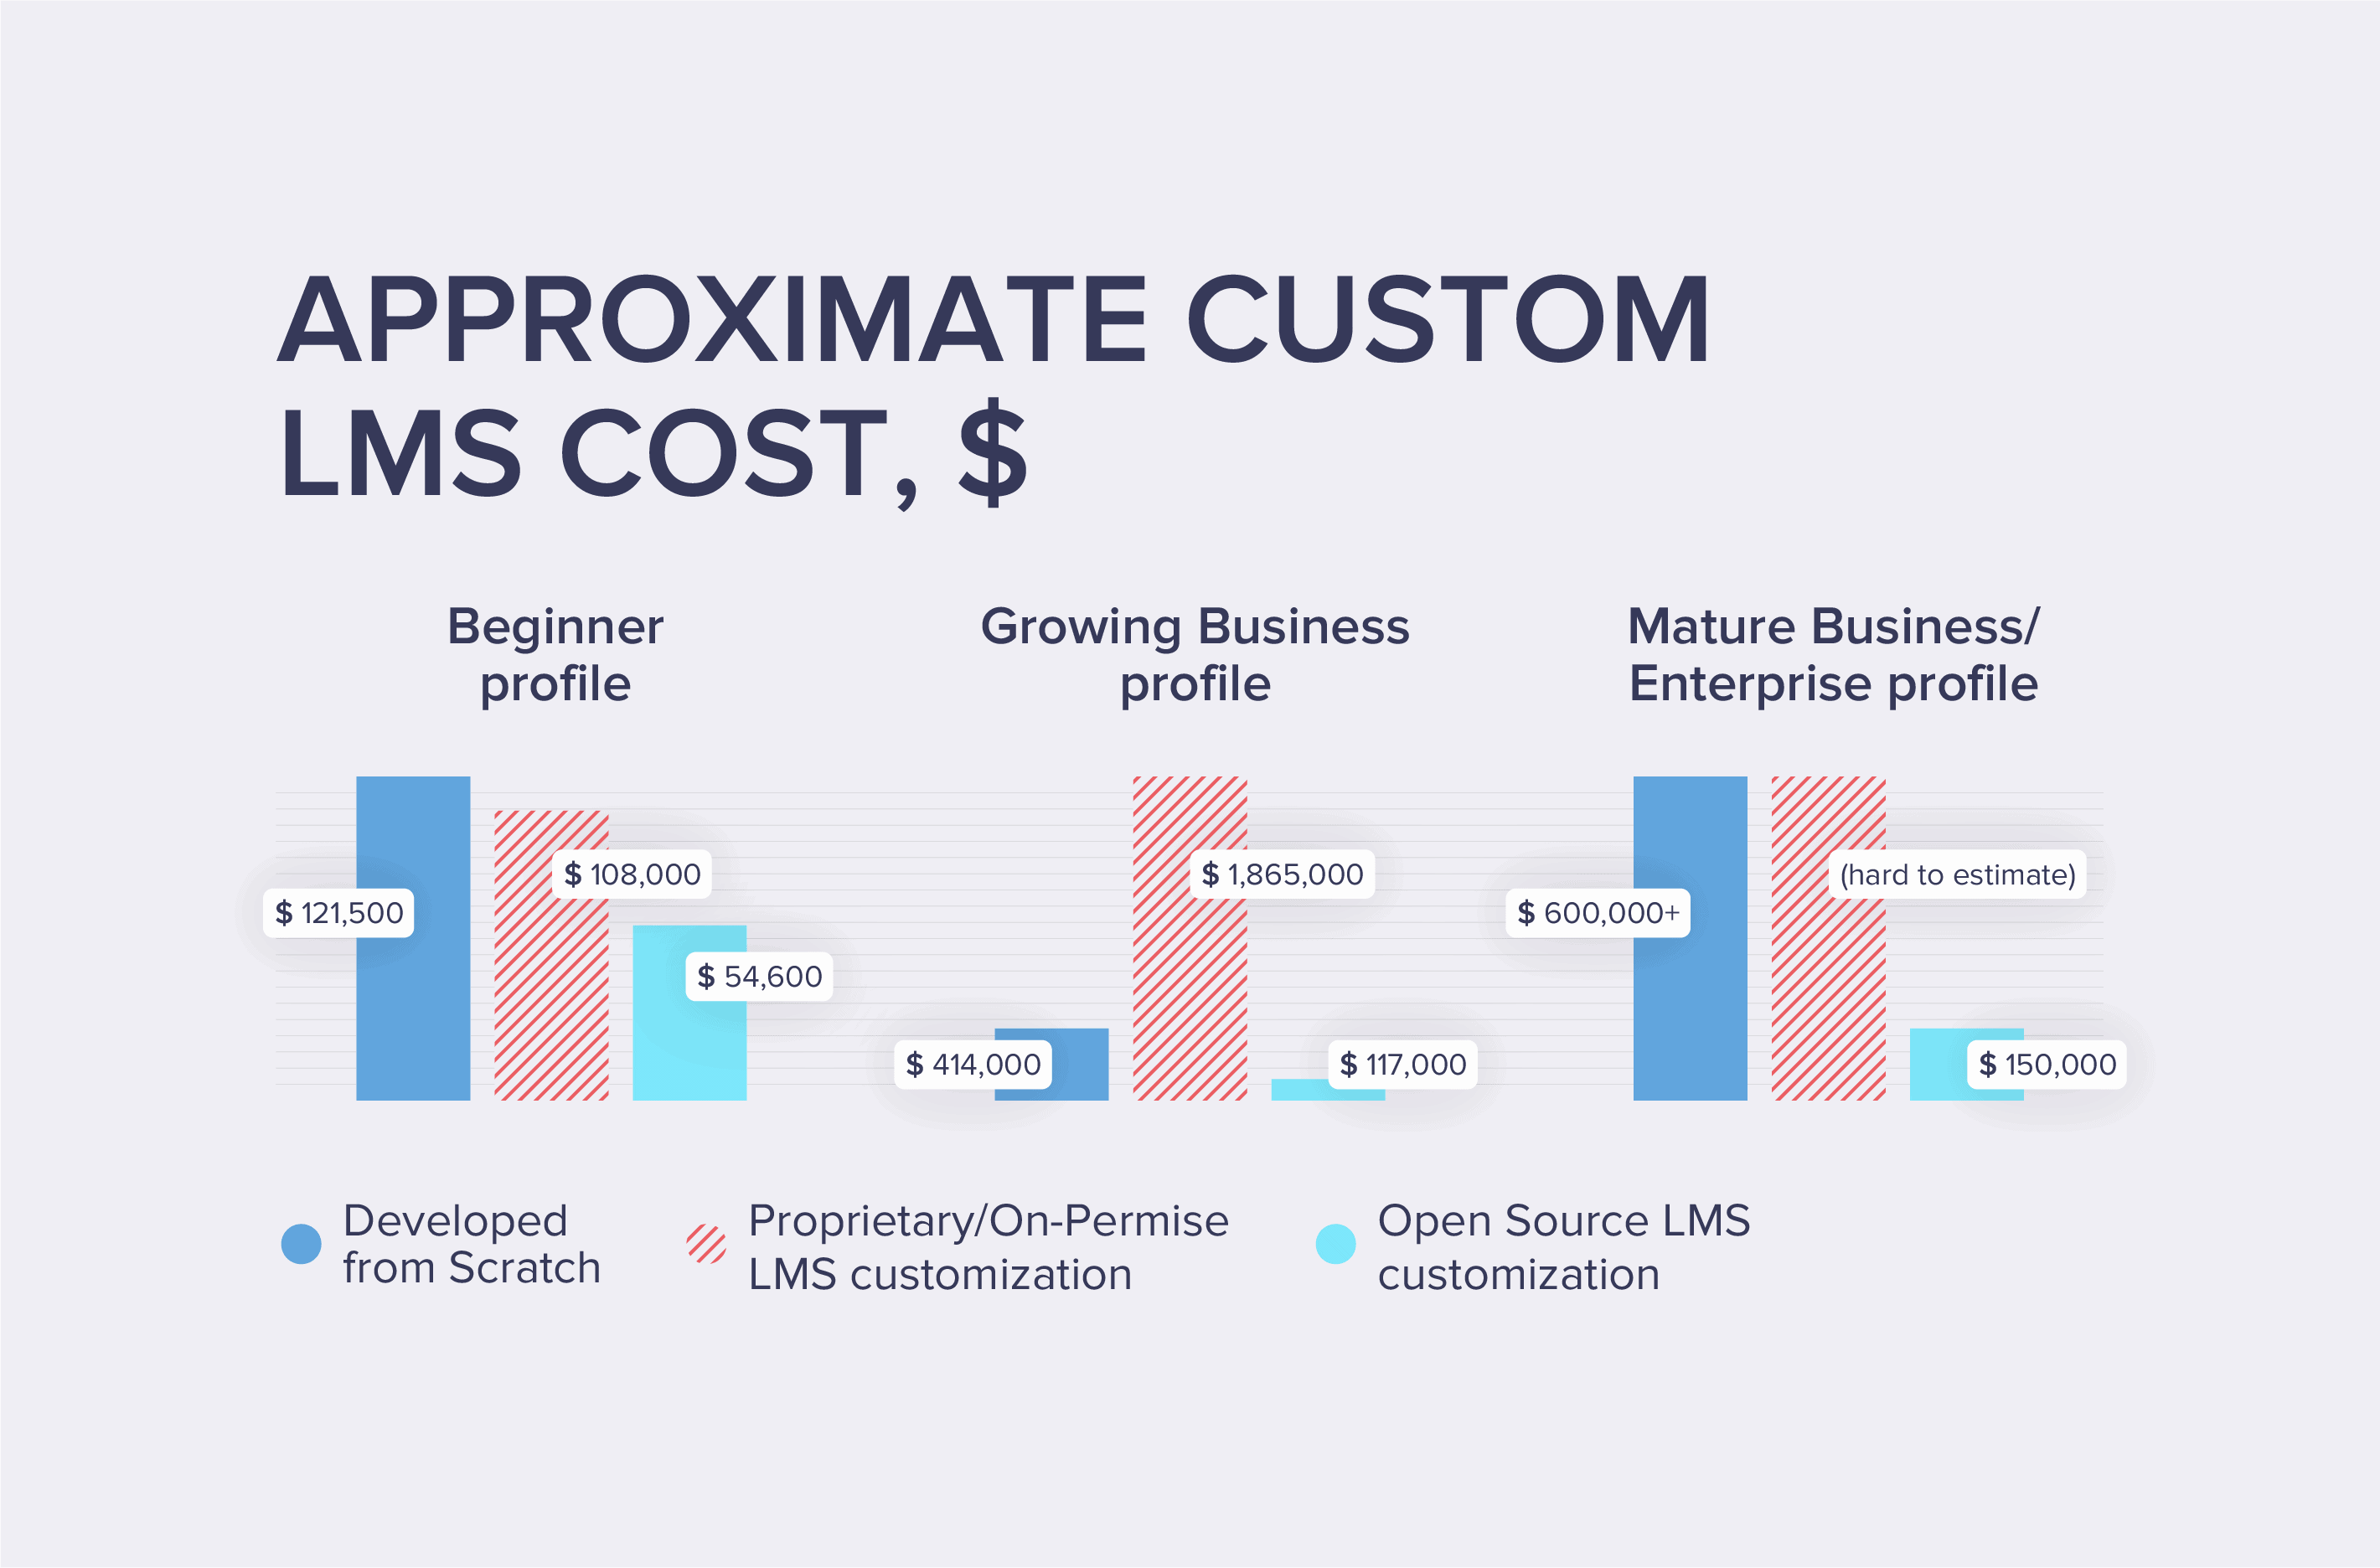 Approximate Custom LMS cost, $